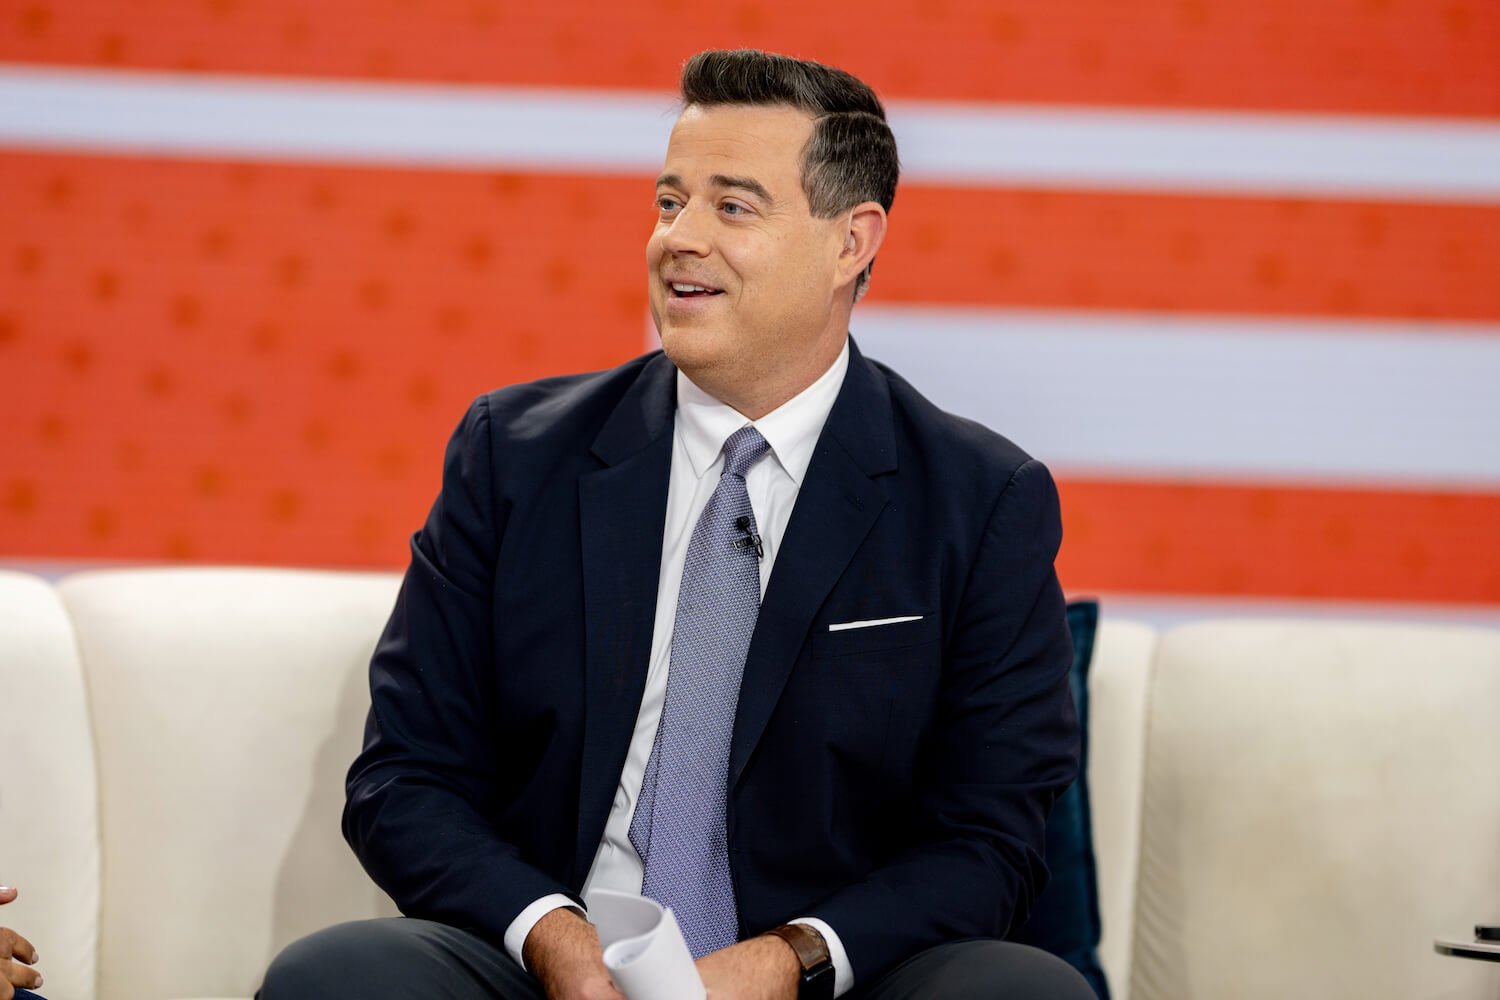 Carson Daly in a suit on 'Today'